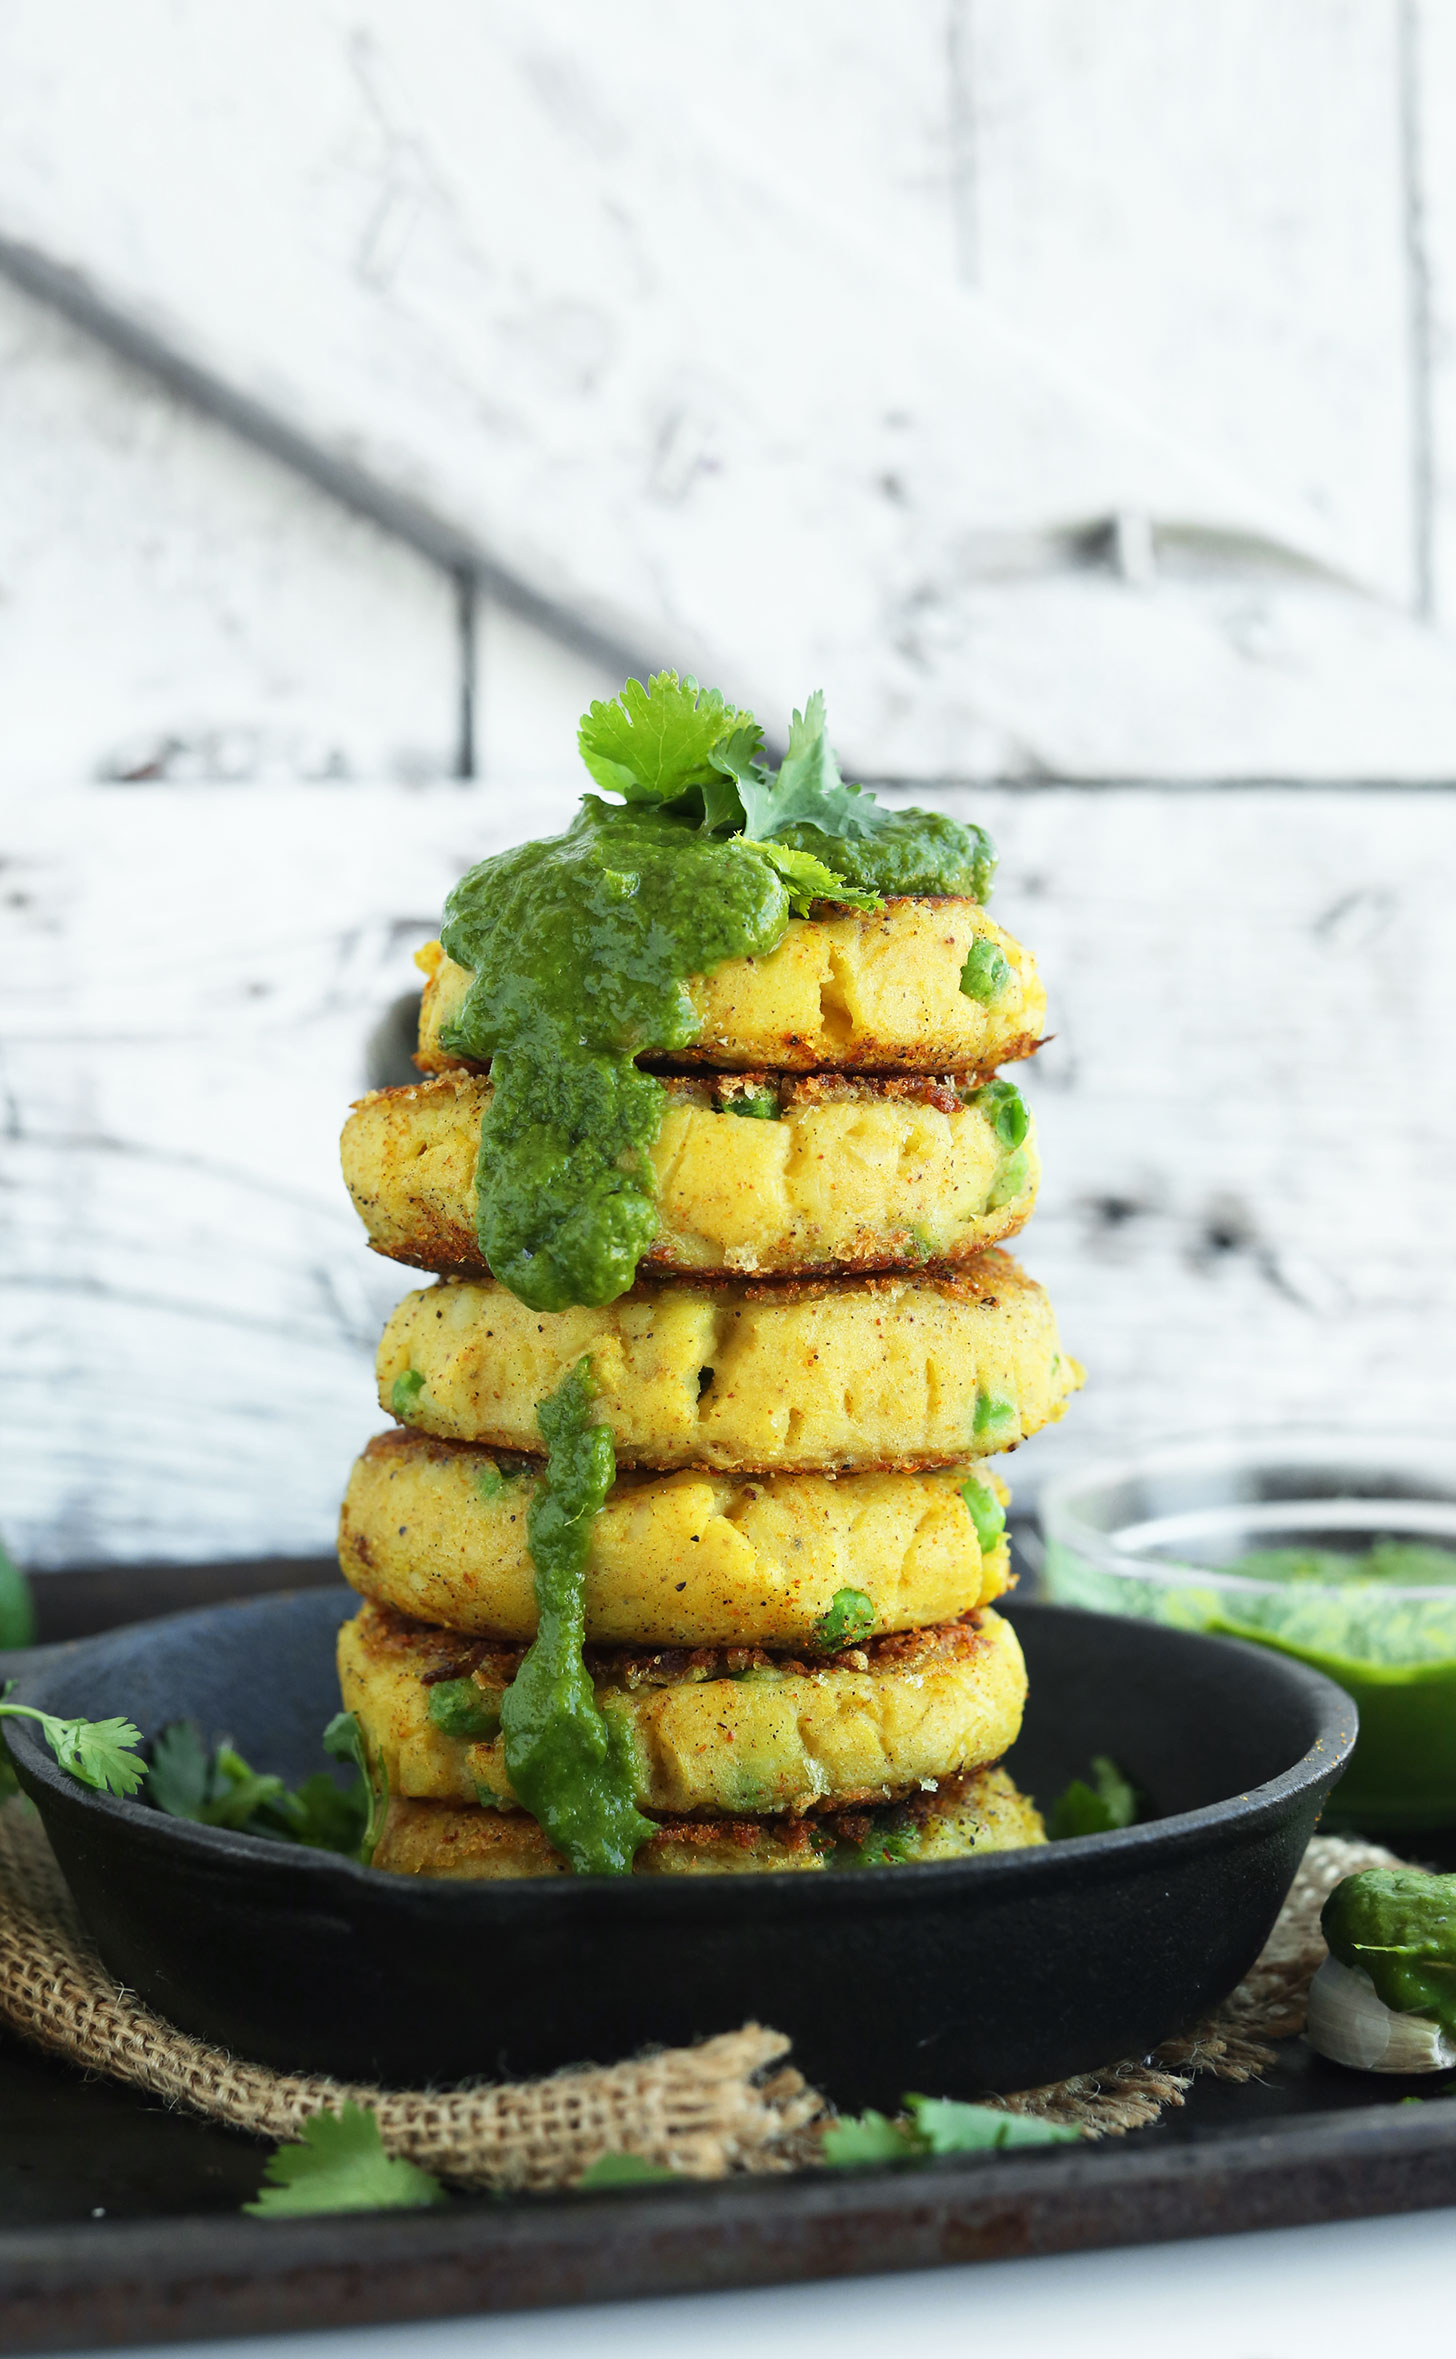 Stack of Samosa-Inspired Potato Cakes dripping with delicious Green Chutney